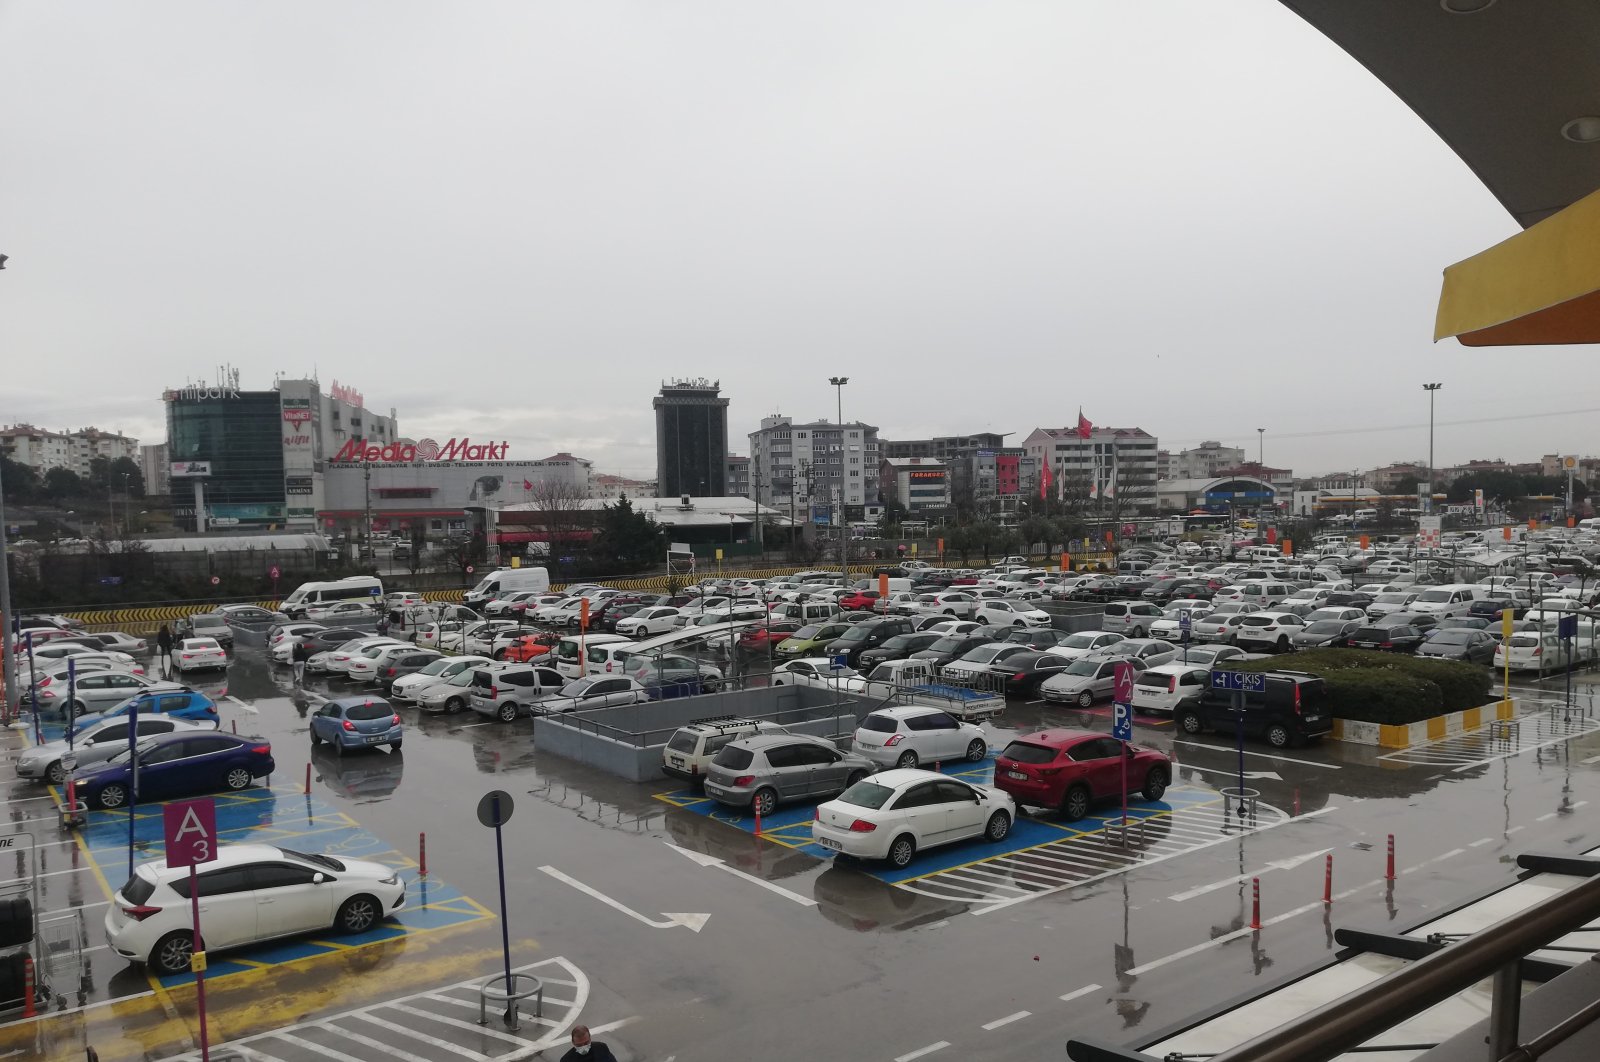 A shopping mall's parking lot is seen under rainfall in Northwestern Bursa province on March 6, 2021. (IHA Photo)